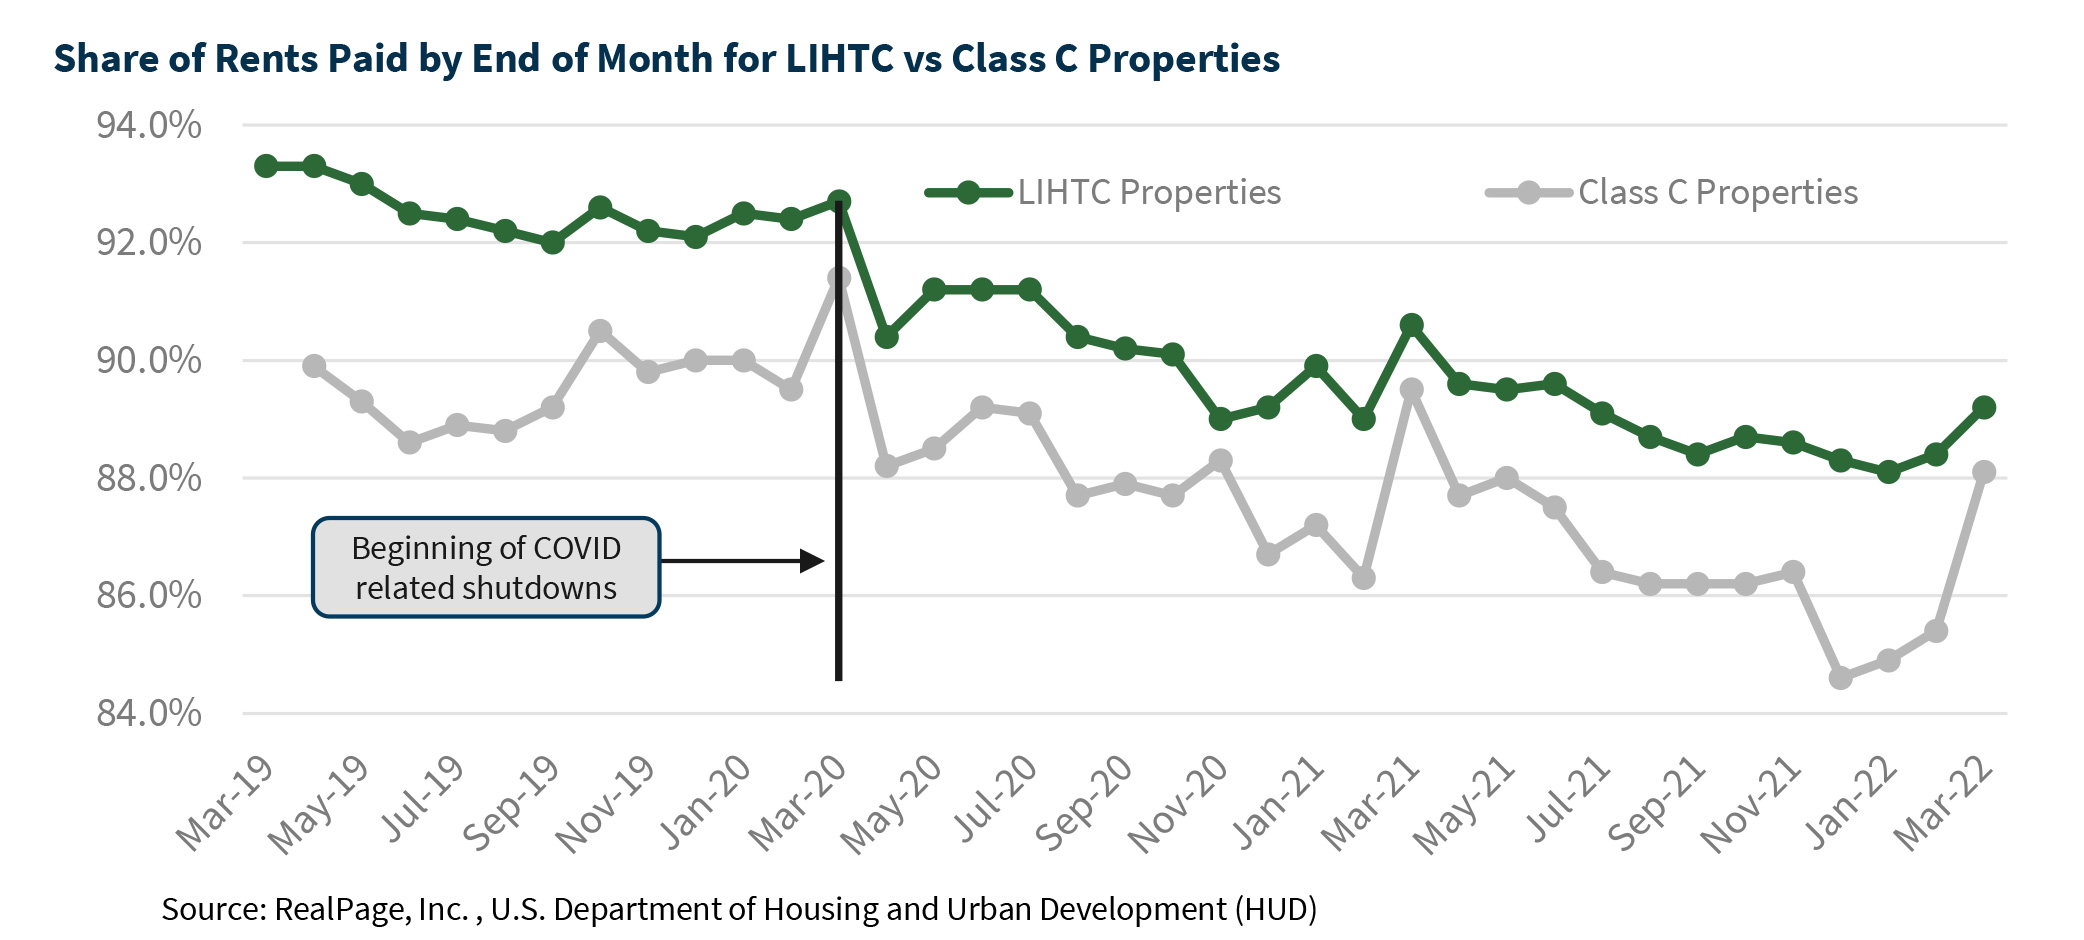 Share of Rents Paid by End of Month for LIHTC vs Class C Properties